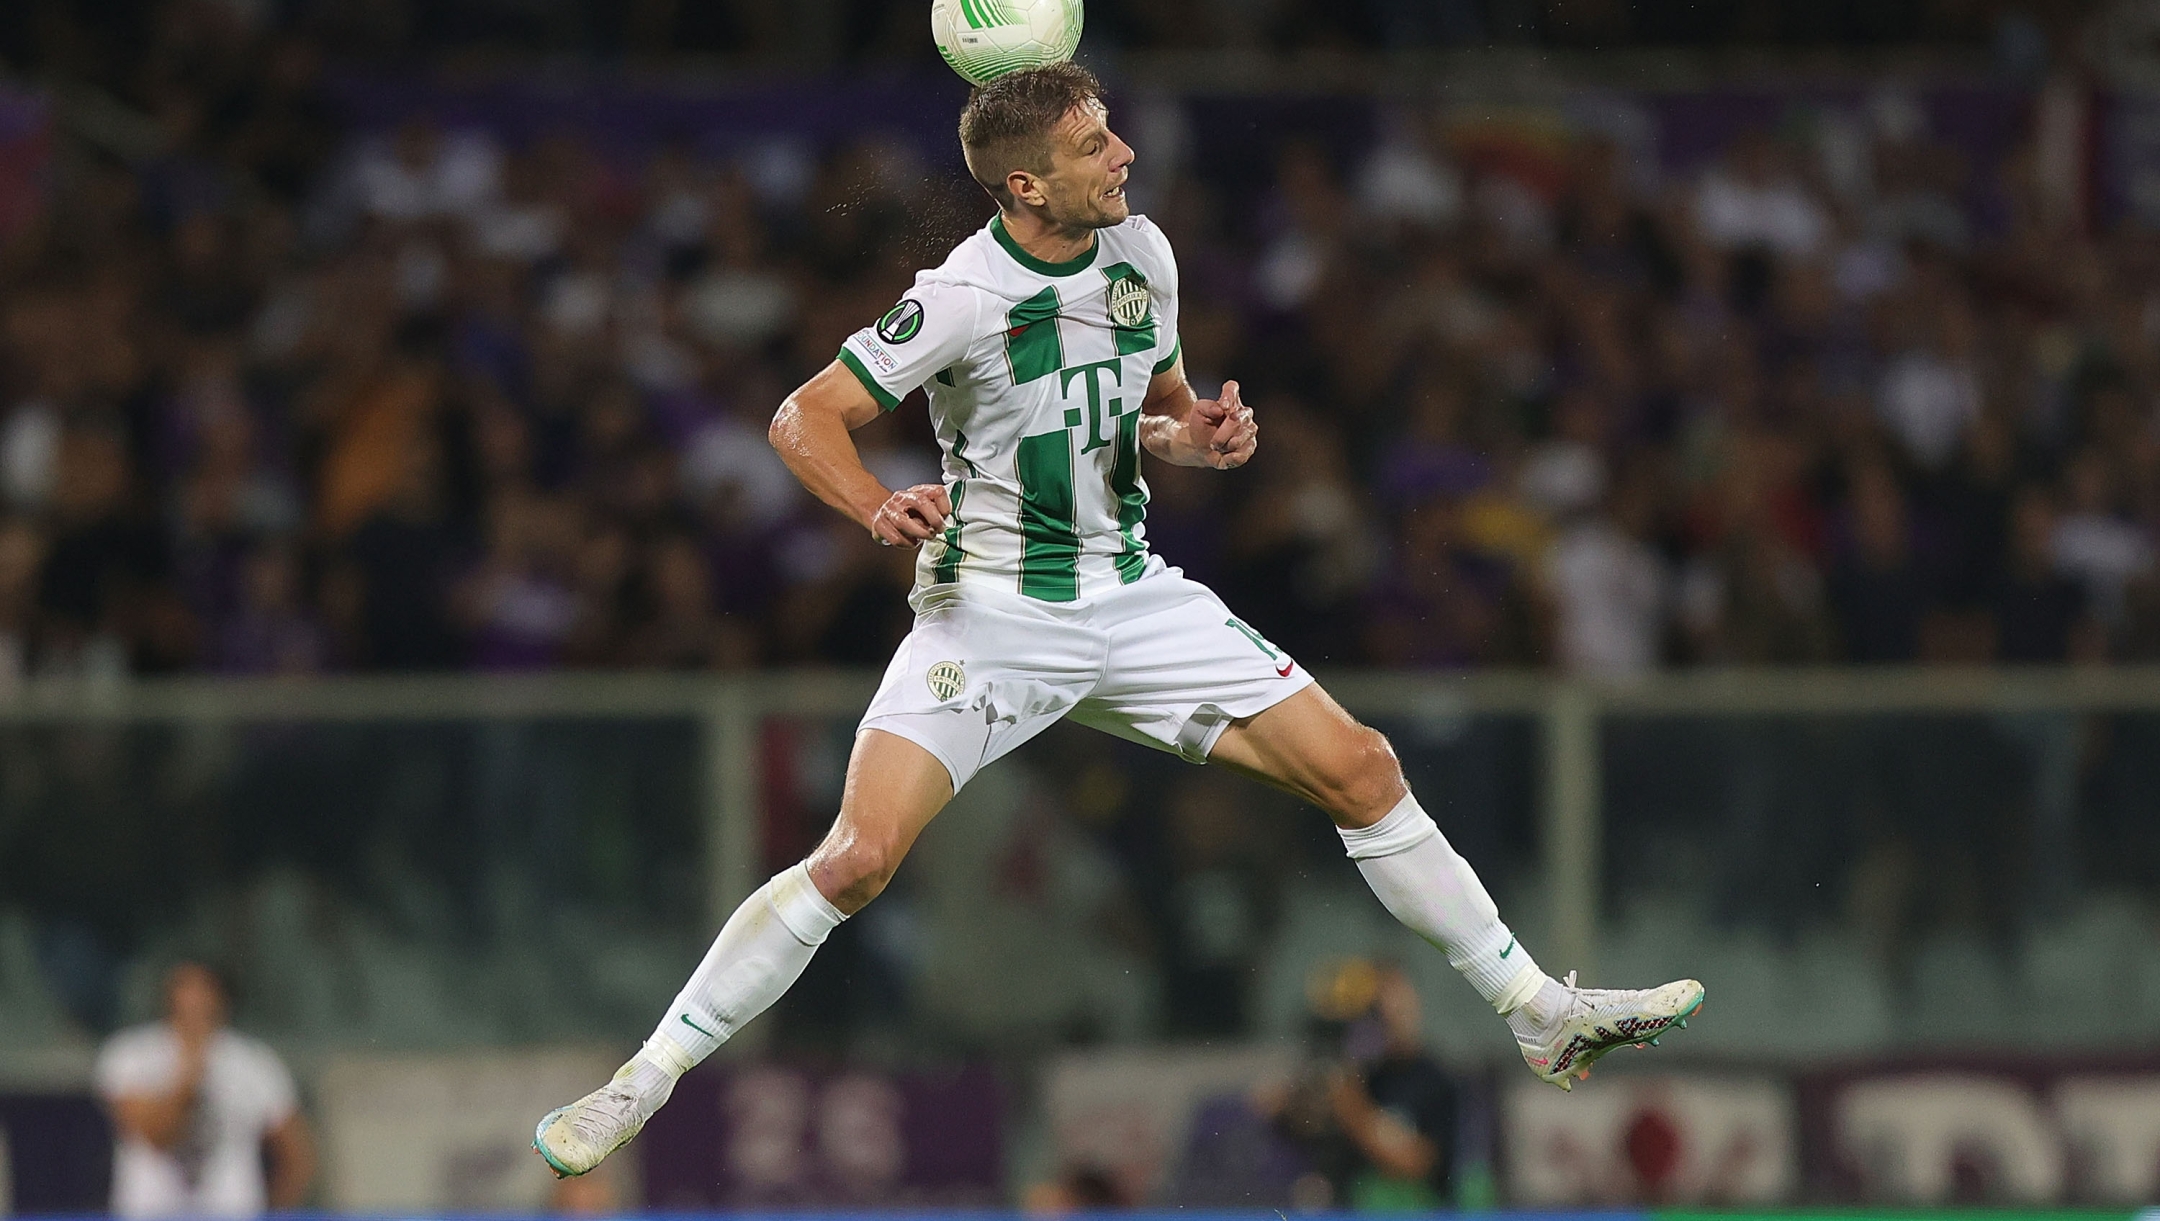 FLORENCE, ITALY - OCTOBER 5: Barnabas Varga of Ferencvarosi TC in action during the UEFA Europa Conference League match between ACF Fiorentina and Ferencvarosi TC at Stadio Artemio Franchi on October 5, 2023 in Florence, Italy. (Photo by Gabriele Maltinti/Getty Images)